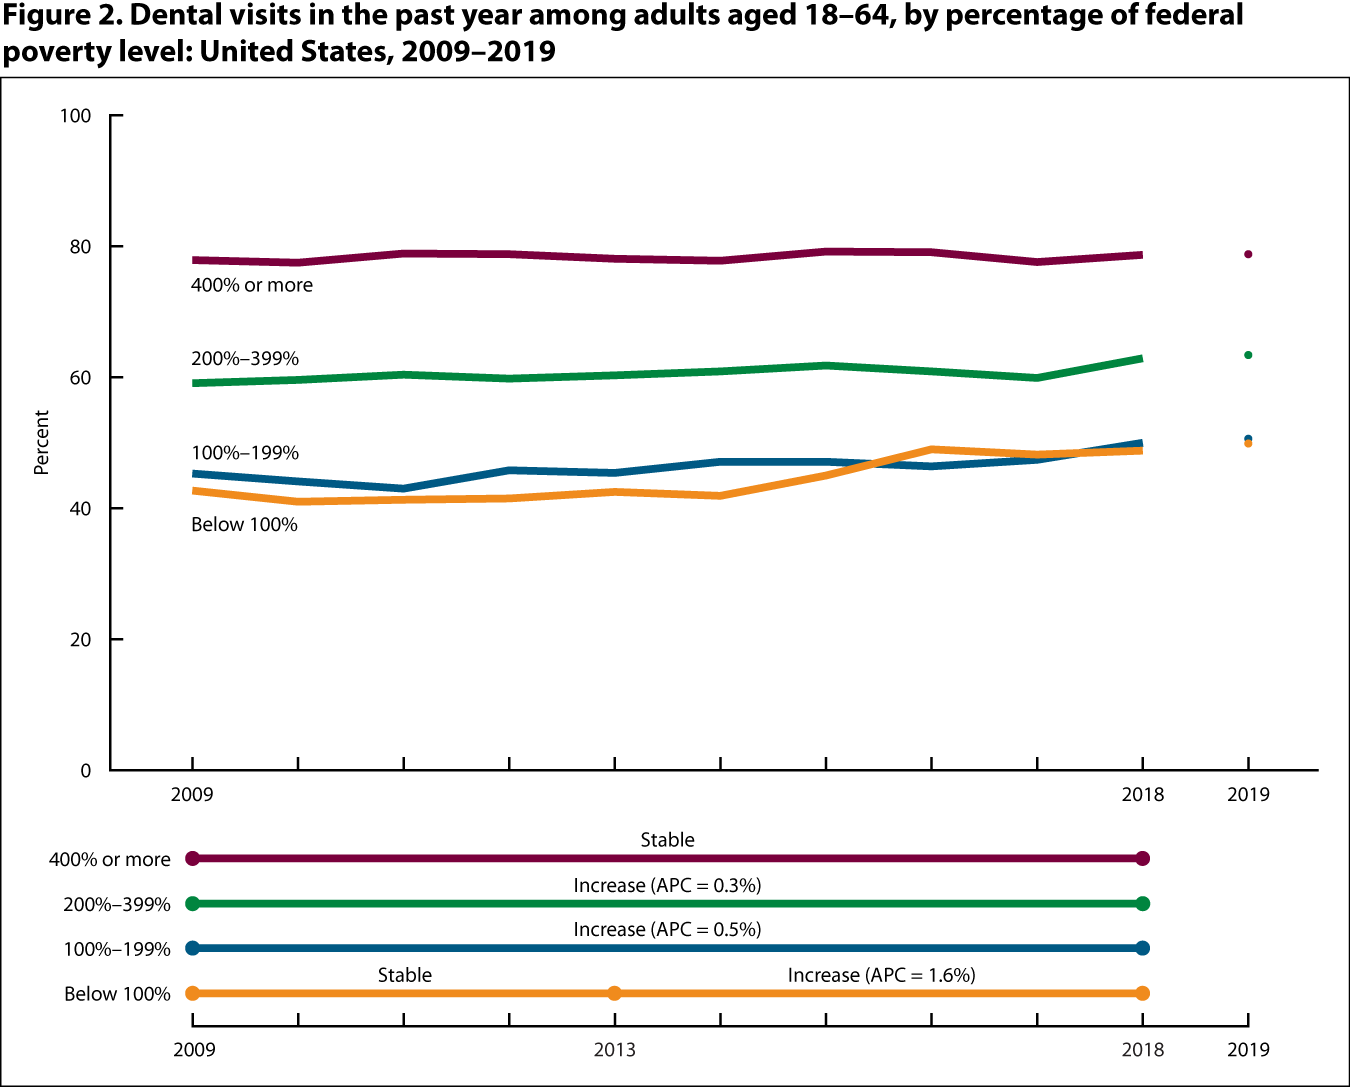 Figure 2 is a line graph showing the percentage of adults aged 18–64 with a dental visit in the past year, by percentage of federal poverty level for 2009 through 2018 and at 2019 (point).